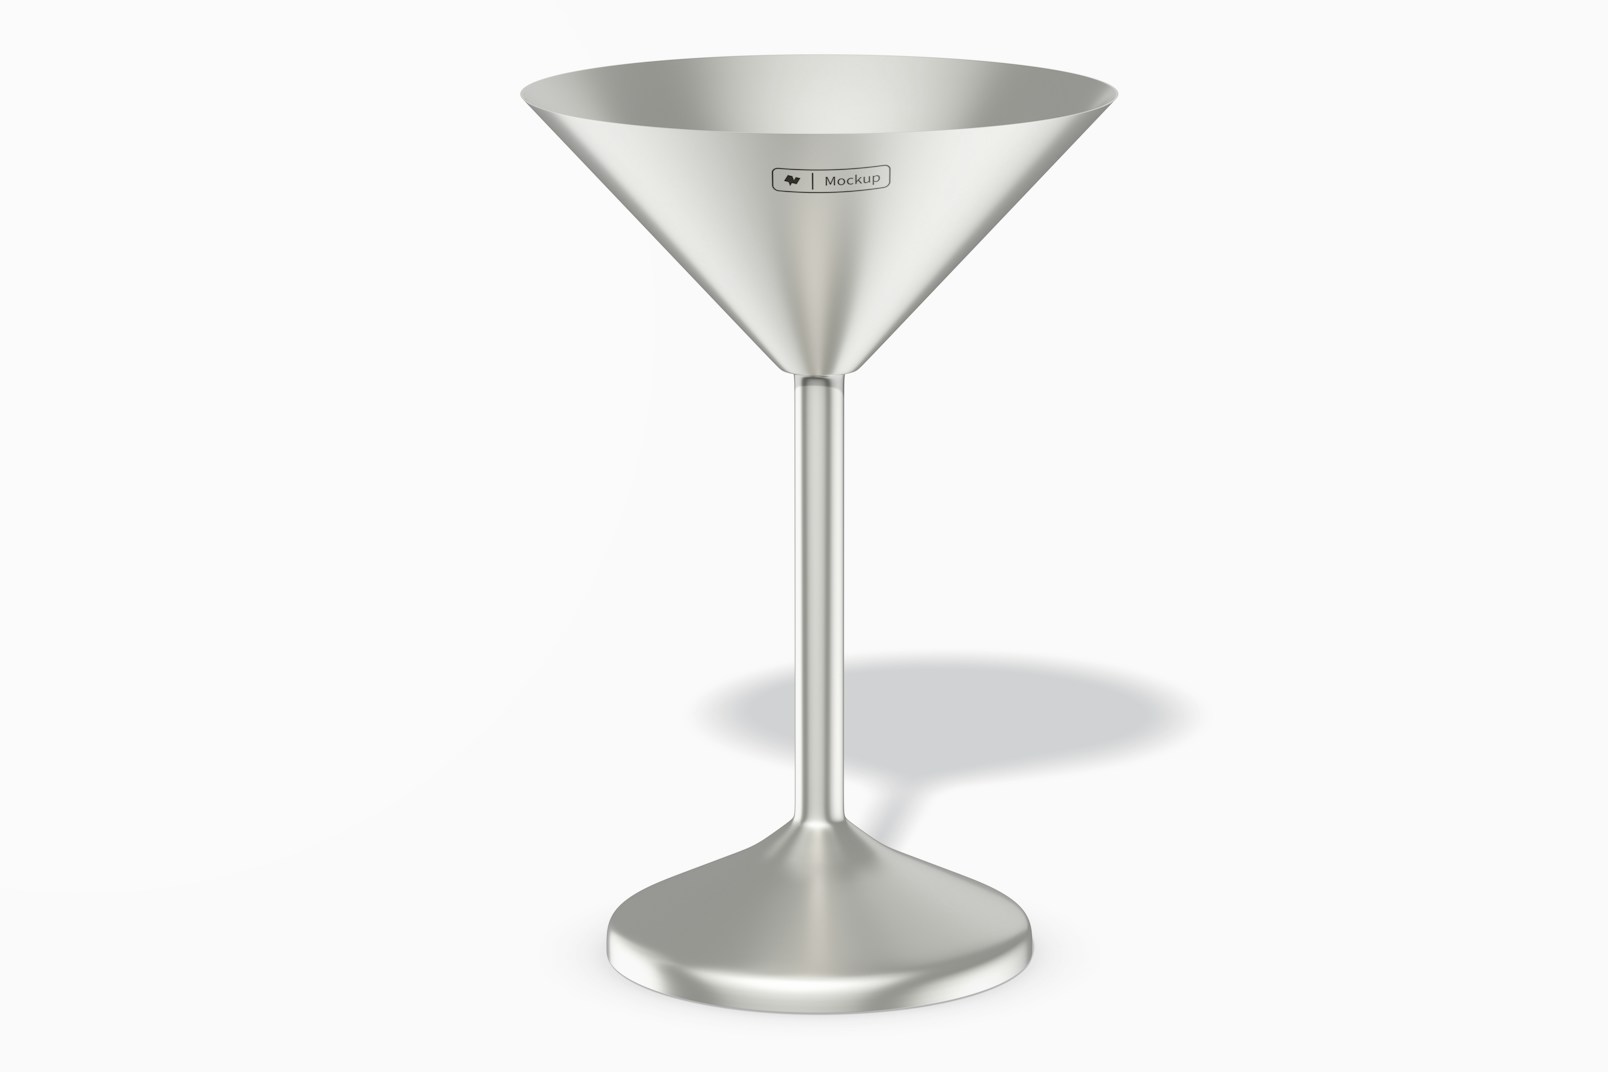 Stainless Steel Martini Glass Mockup